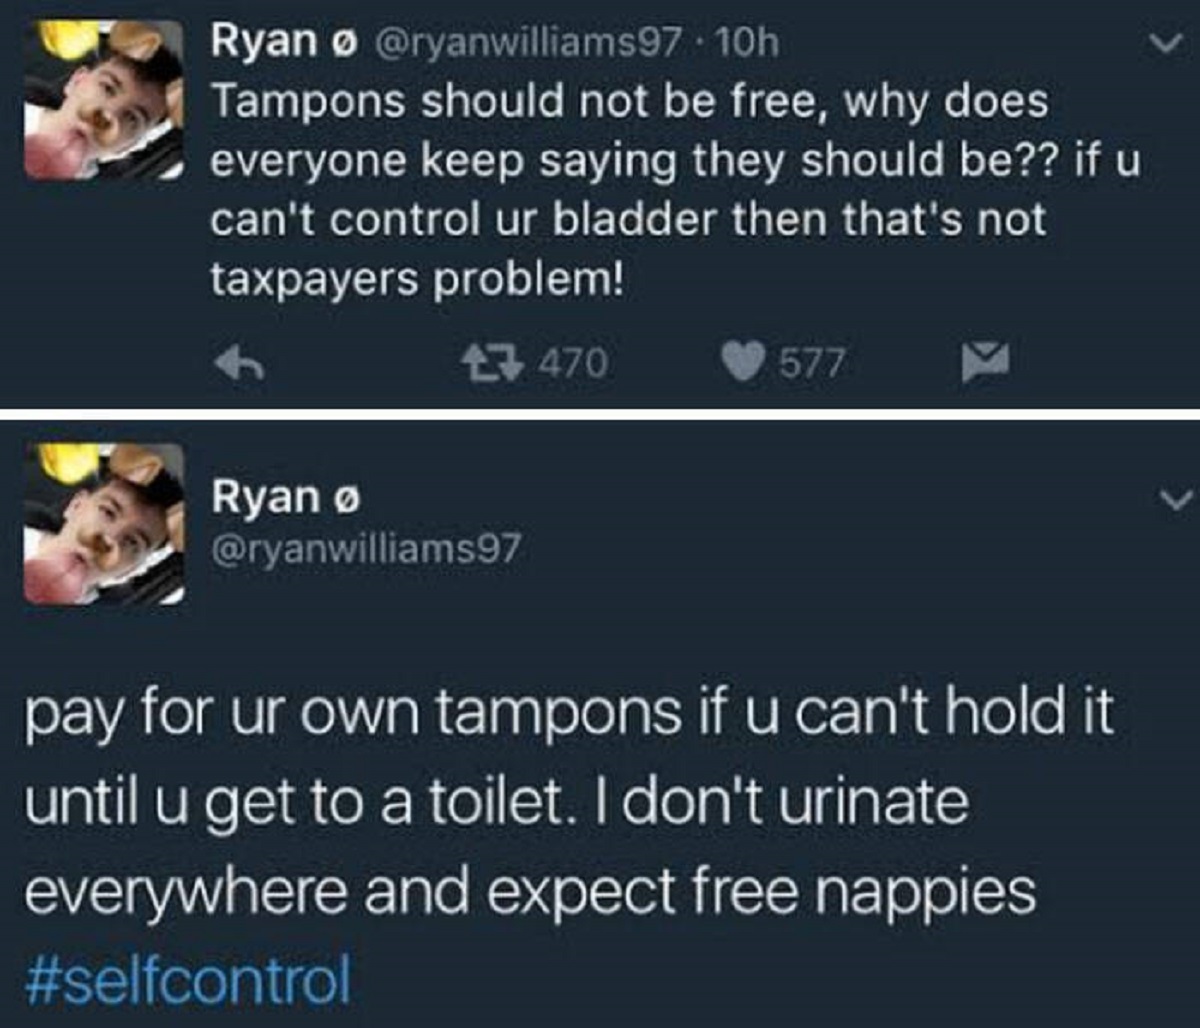 screenshot - Ryan Tampons should not be free, why does everyone keep saying they should be?? if u can't control ur bladder then that's not taxpayers problem! Ryan 7470 577 pay for ur own tampons if u can't hold it until u get to a toilet. I don't urinate 